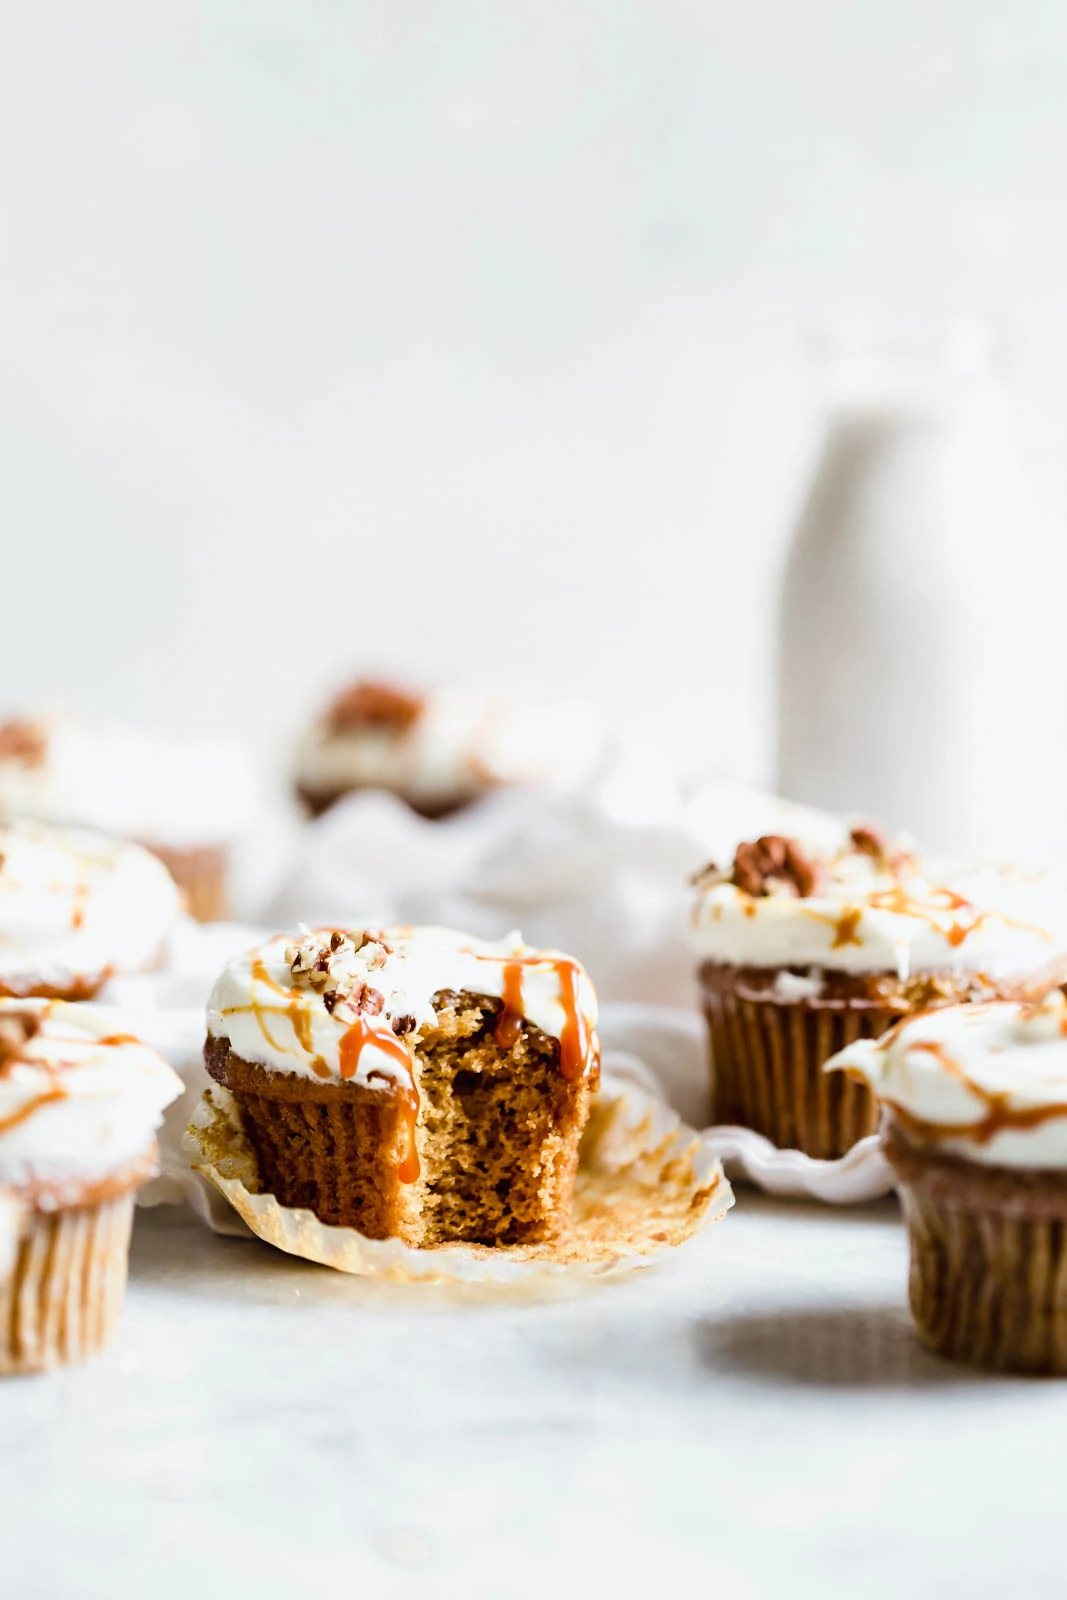 The perfect winter cupcake is here! Sweet potato cupcakes flavored with cinnamon and ginger and topped with a tangy cream cheese frosting. 